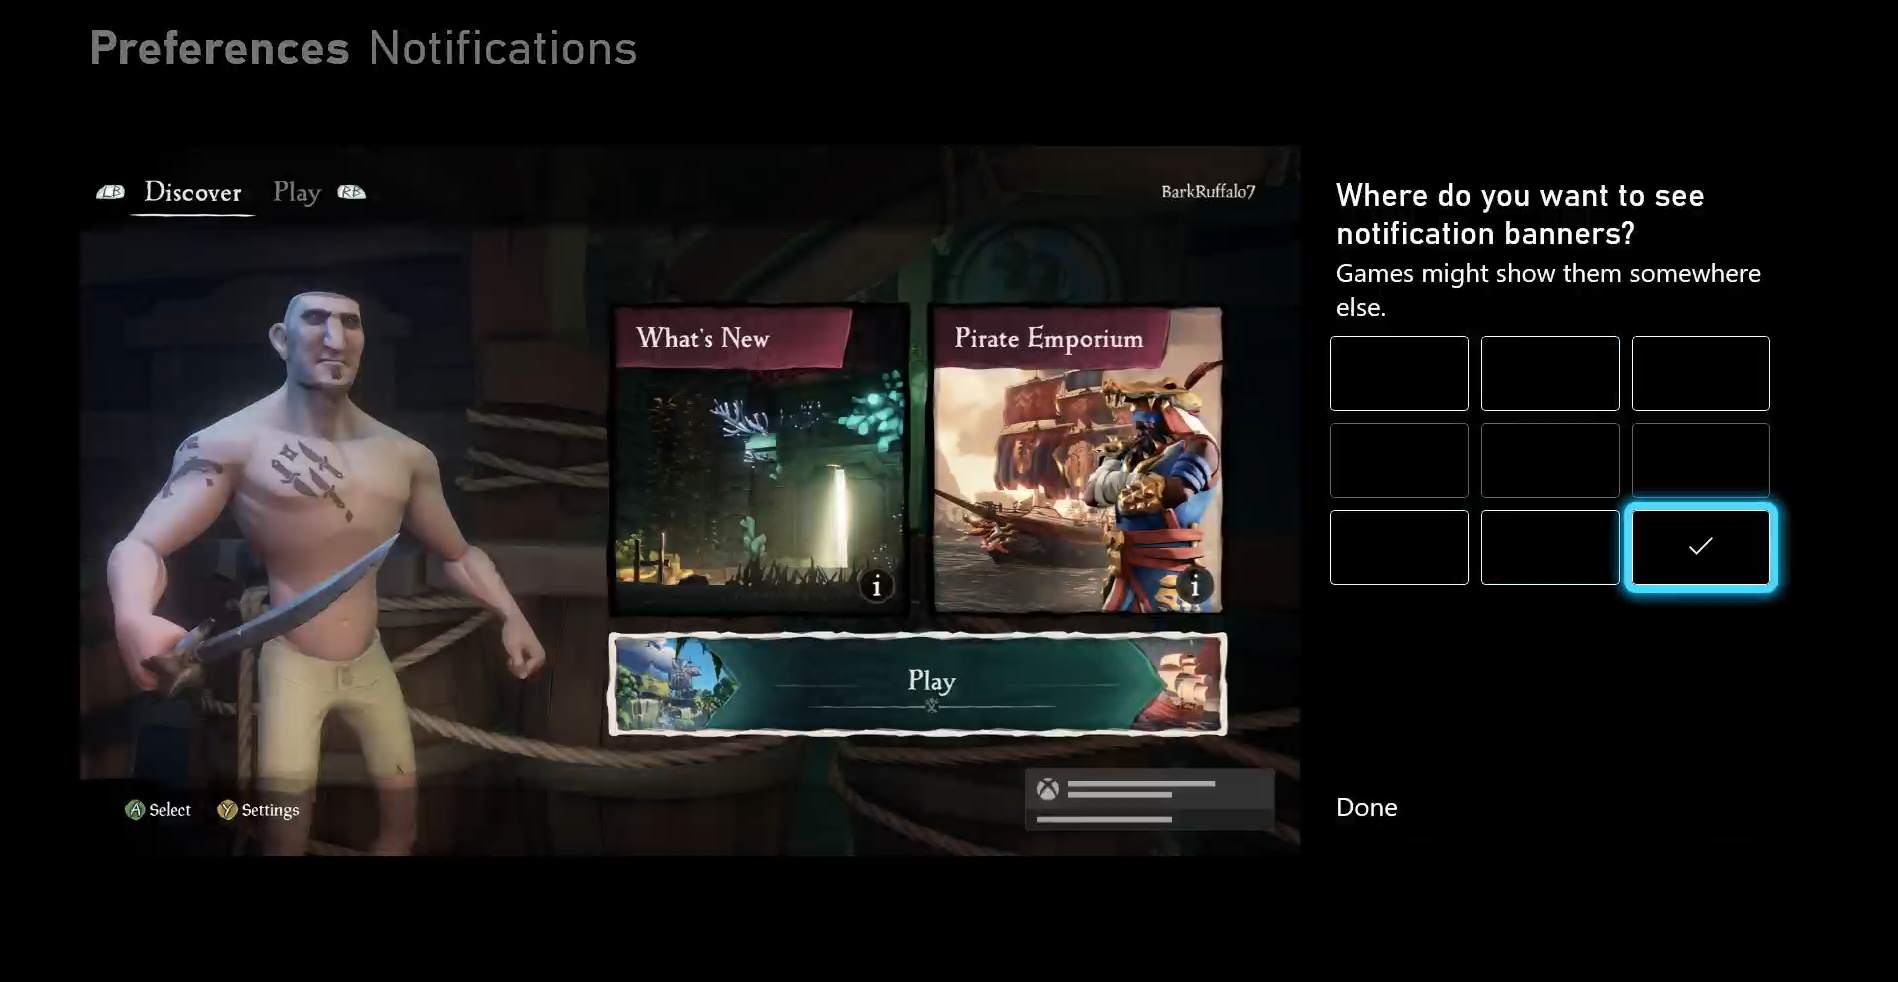 Screenshot that shows the notification preferences screen on Xbox. The lower-right box is highlighted and selected.